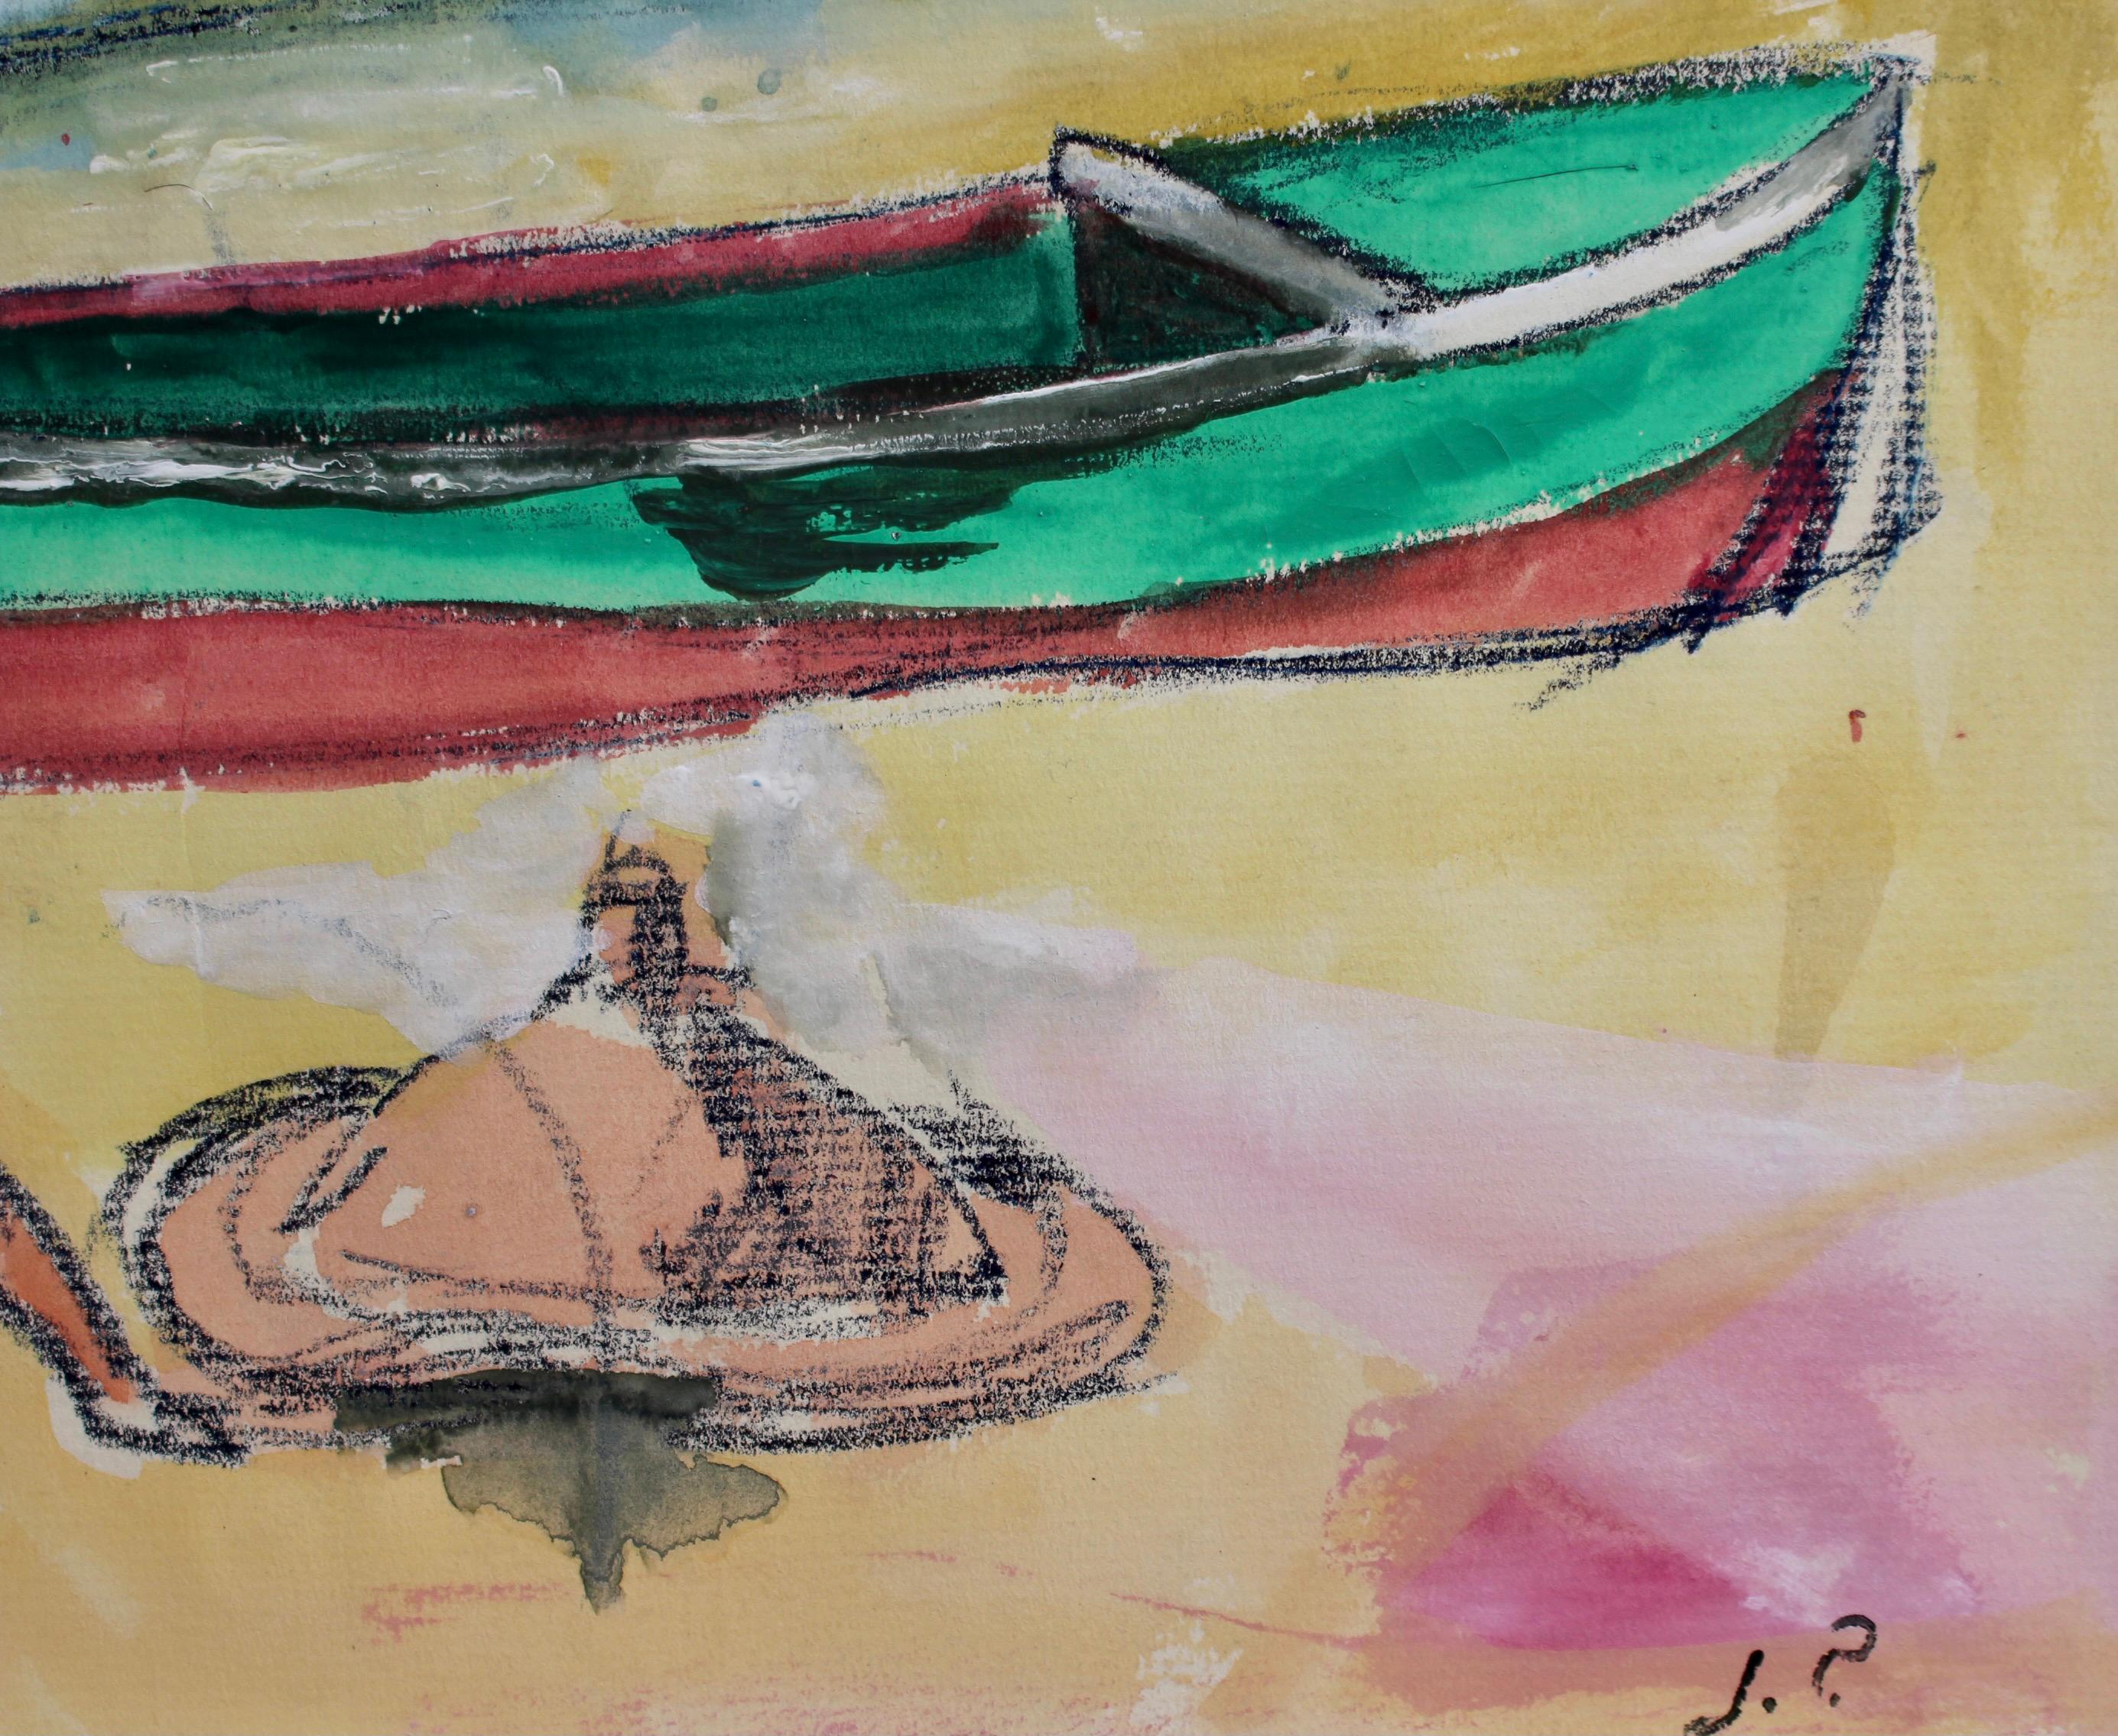 'Small Boat and Bather in Dinard', gouache and charcoal on art paper, by French artist, Jean Pons (1961). Painted in a naïve style, the piece depicts a bather nearby a beached small boat. The sea appears turbulent and the bather's posture signals